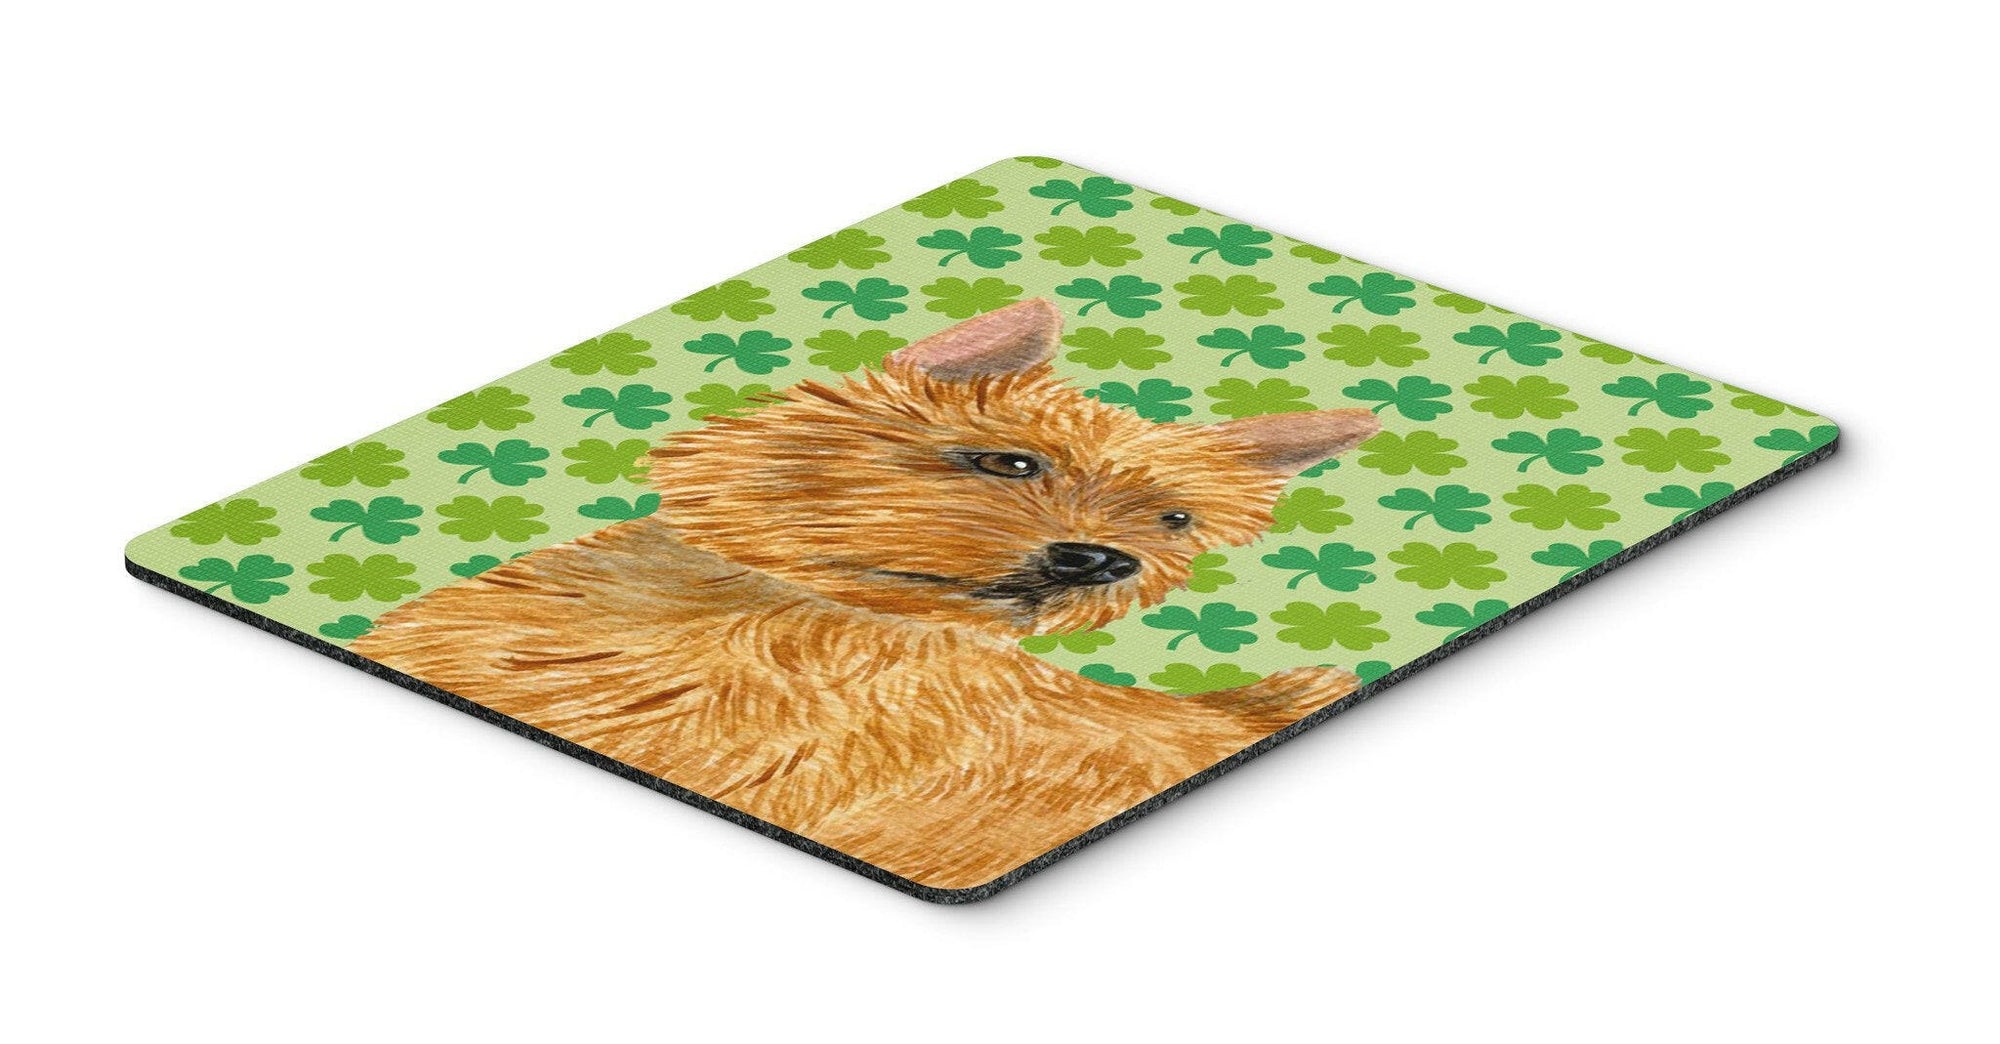 Norwich Terrier St. Patrick's Day Shamrock Mouse Pad, Hot Pad or Trivet by Caroline's Treasures